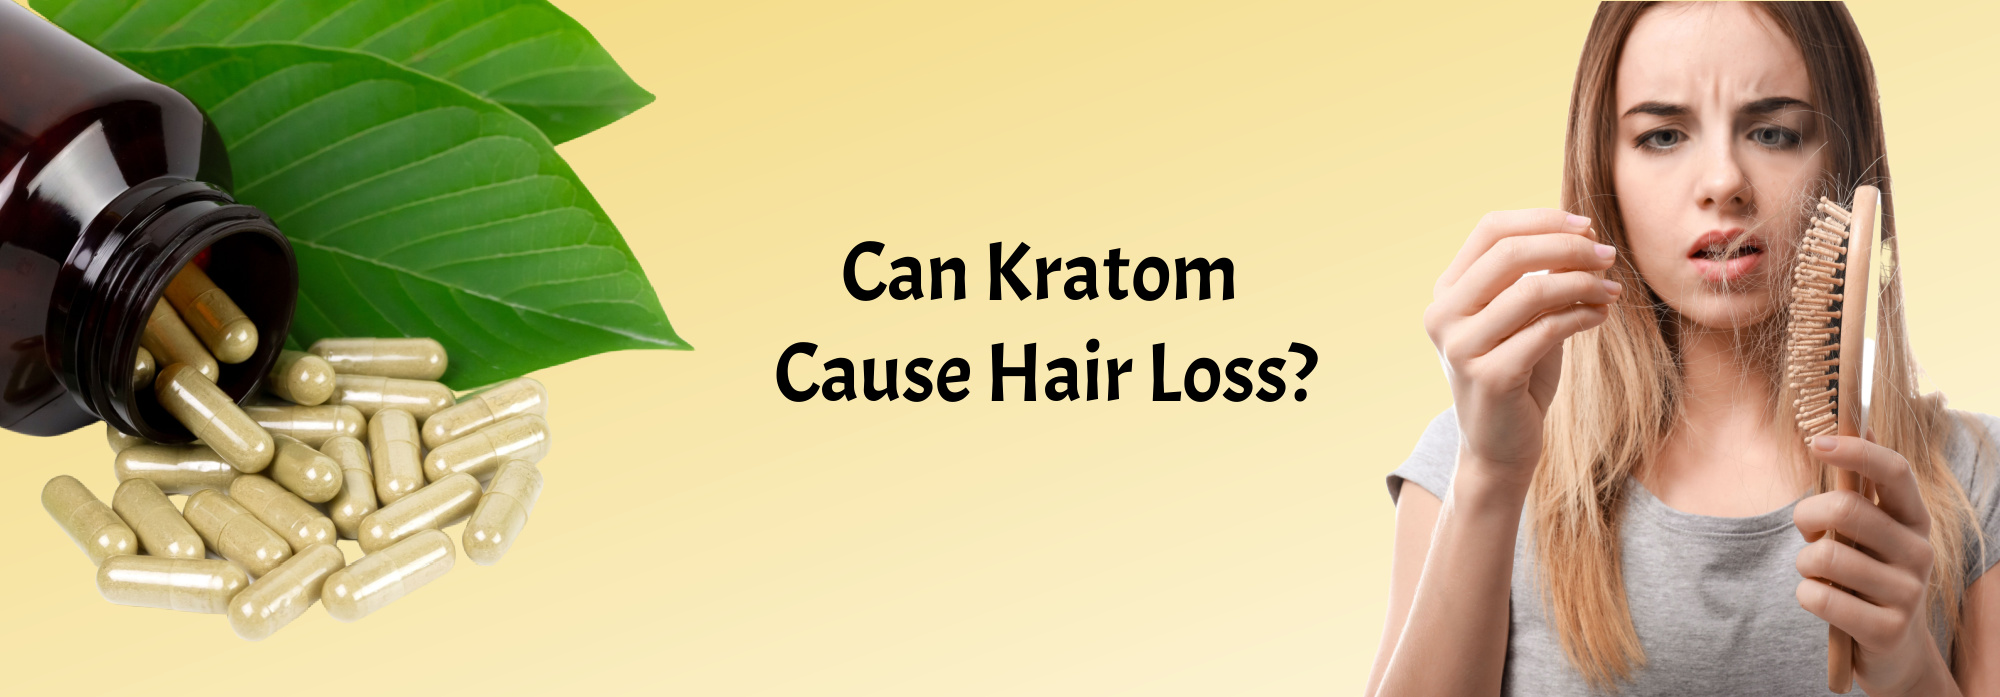 image of can kratom cause hair loss